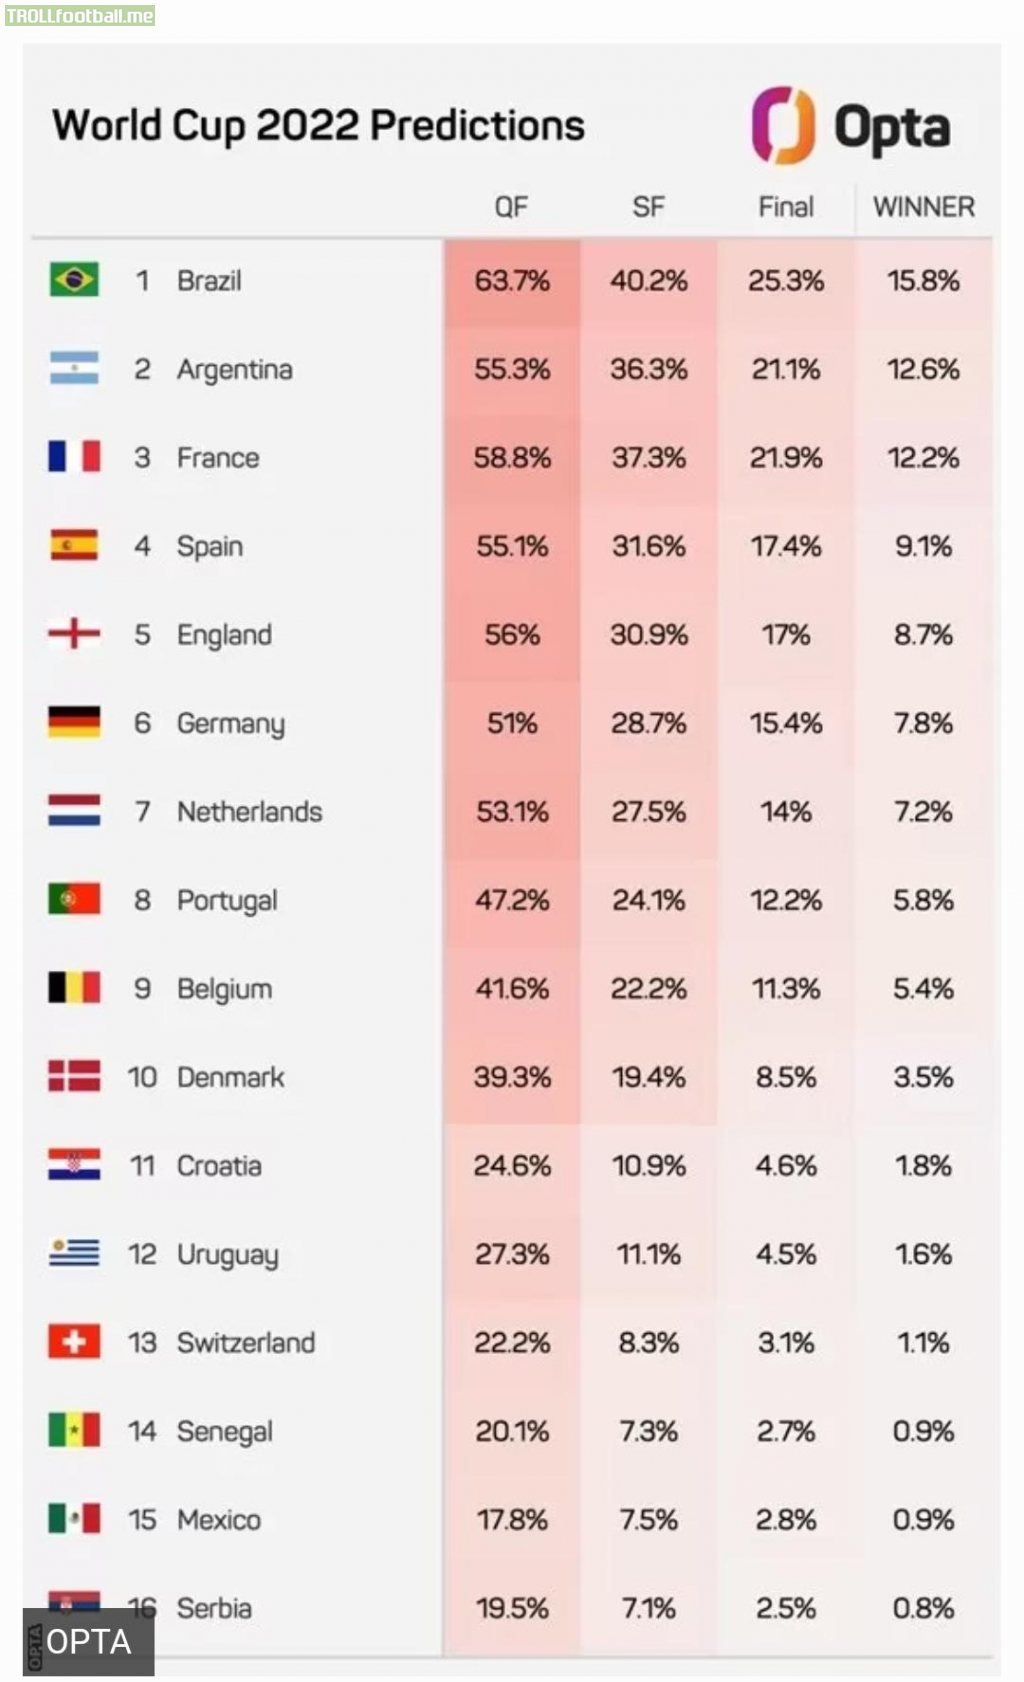 Opta predicts each country's chances of winning the World Cup